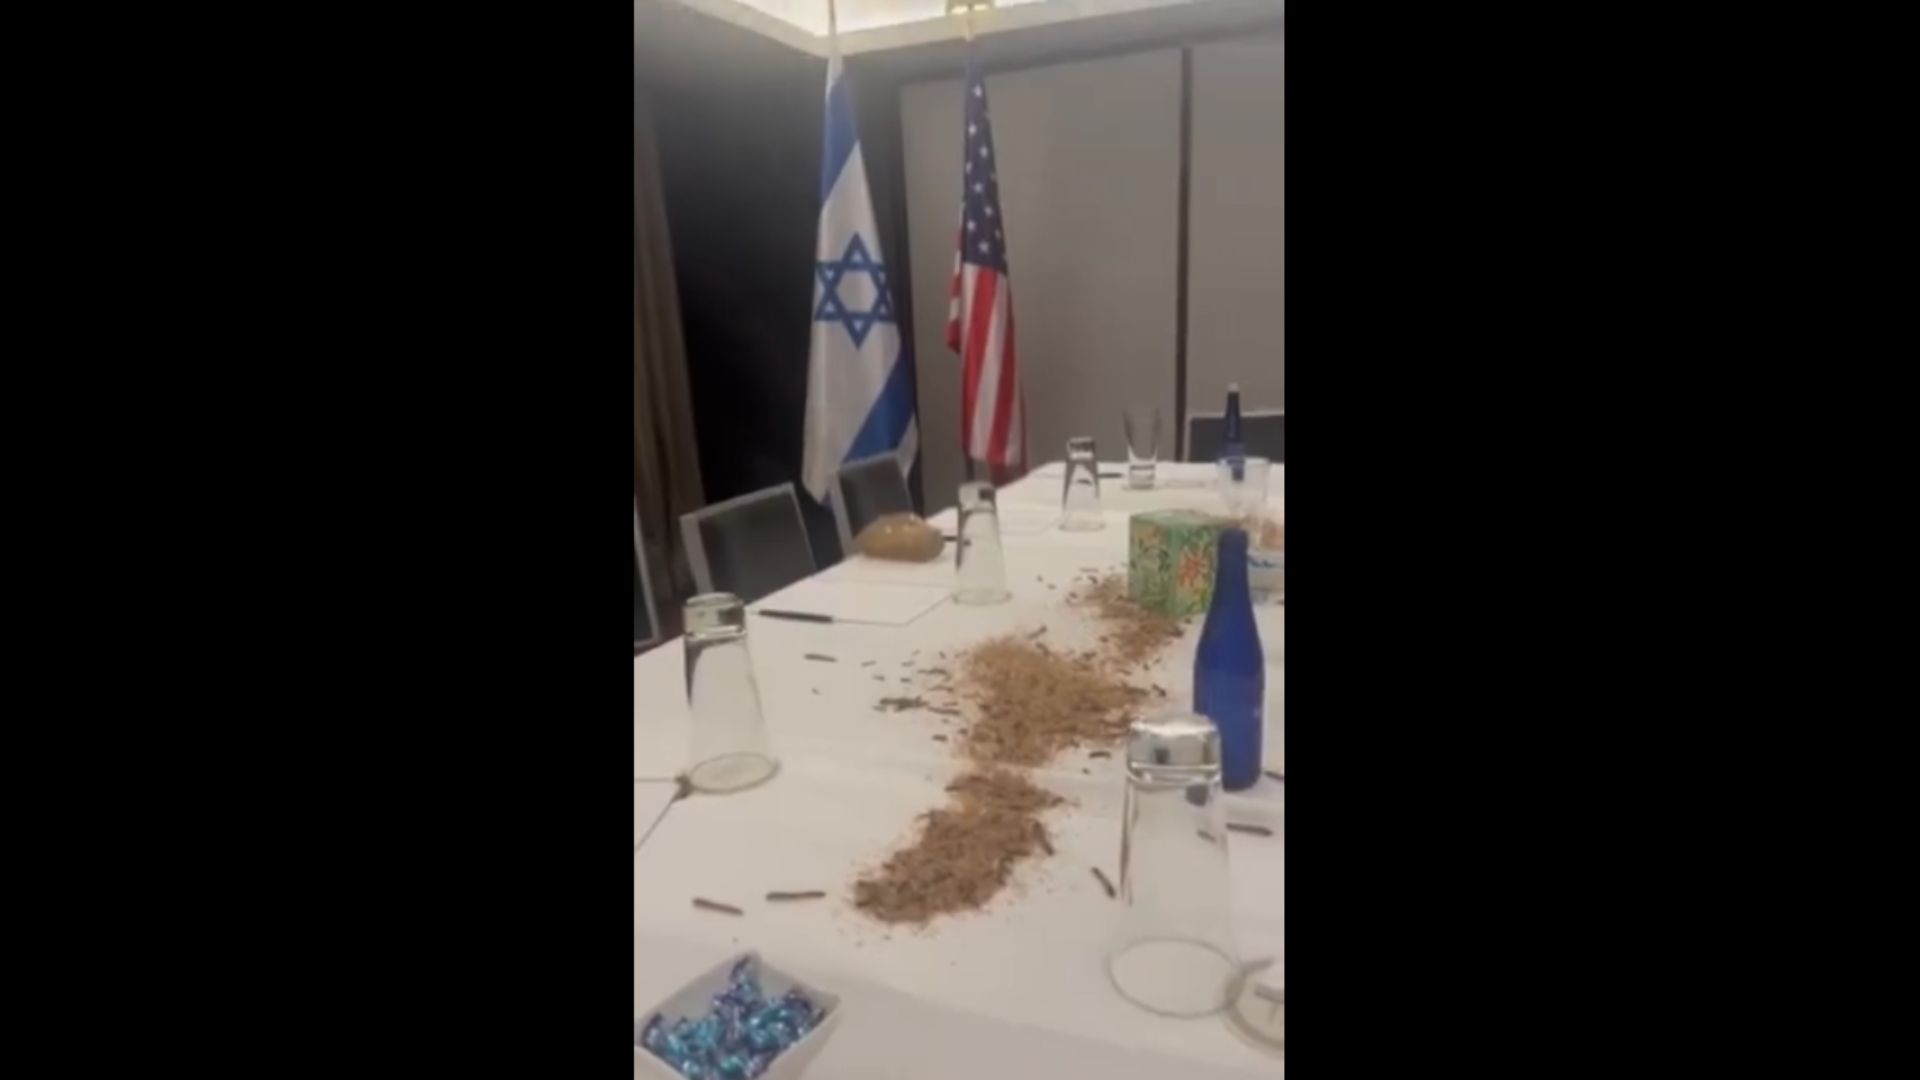 Maggots At Netanyahu’s Table: Are Anti-Israel Protesters’ Claims True? | Watch